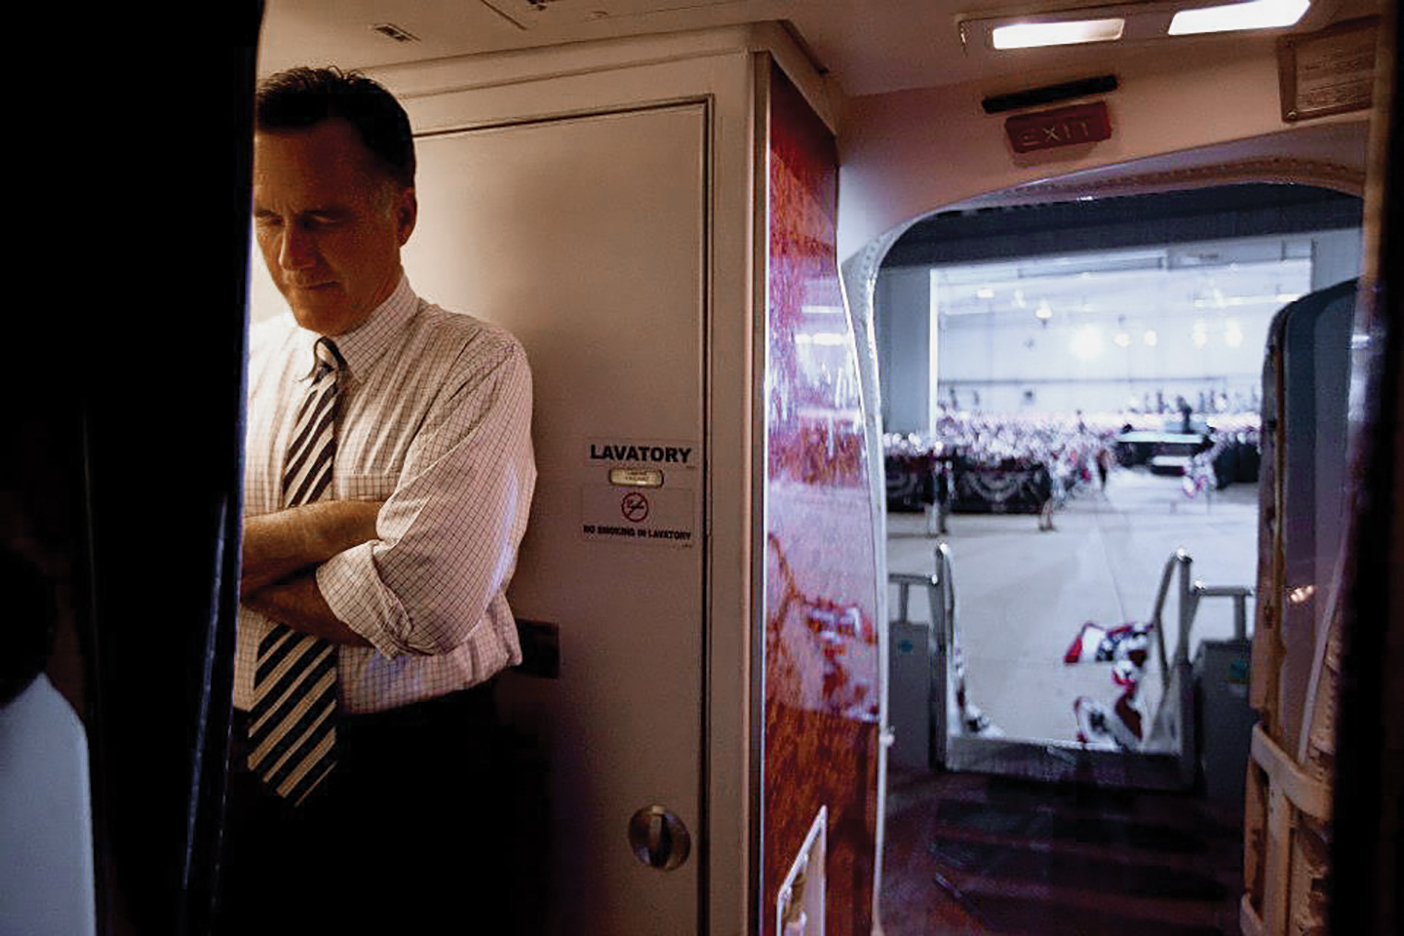 Romney folds his arms and hows his head in prayer before exiting a plane during his campaign